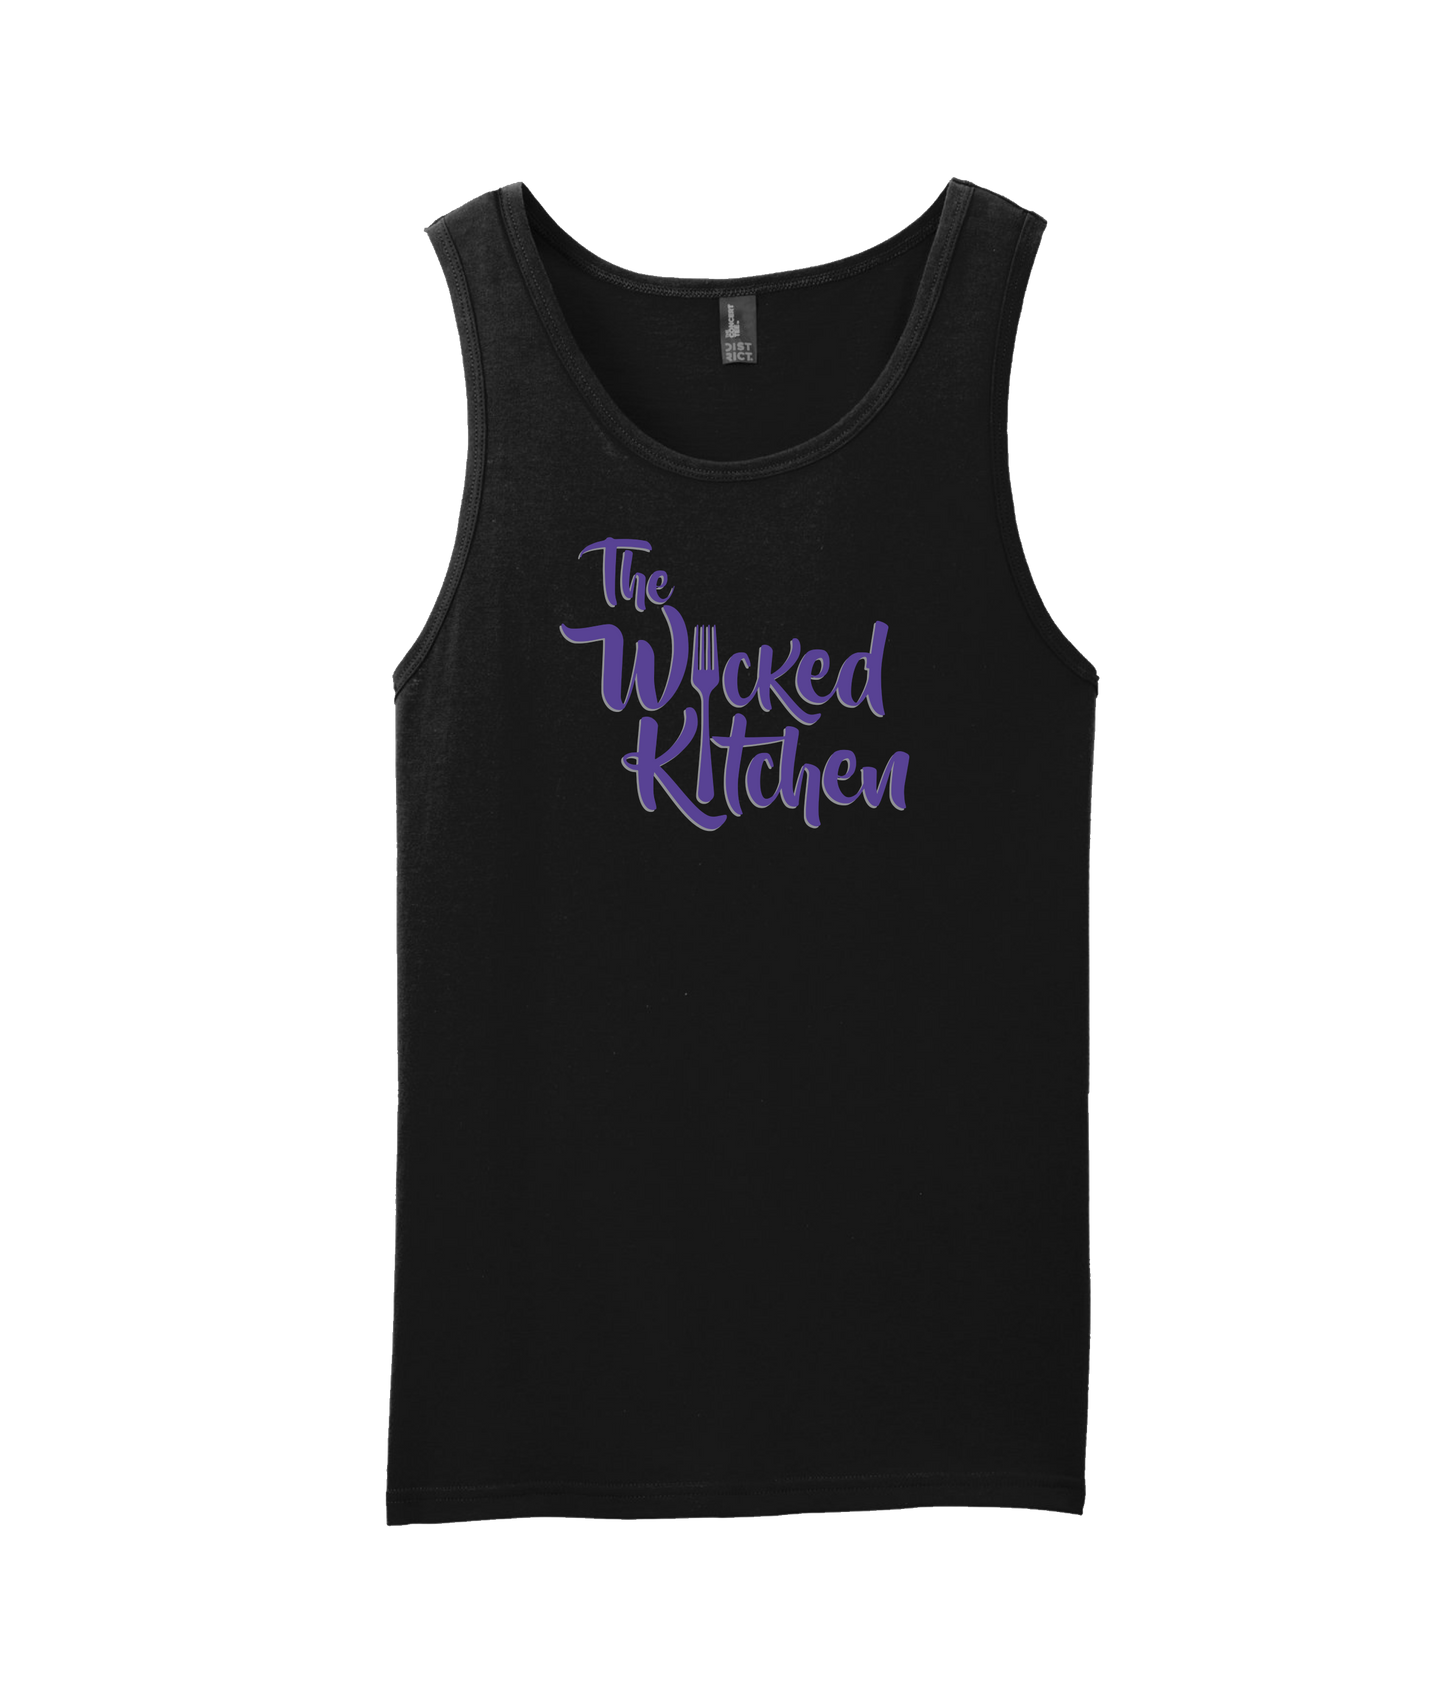 The Wicked Kitchen - 2 Sided Forks - Black Tank Top